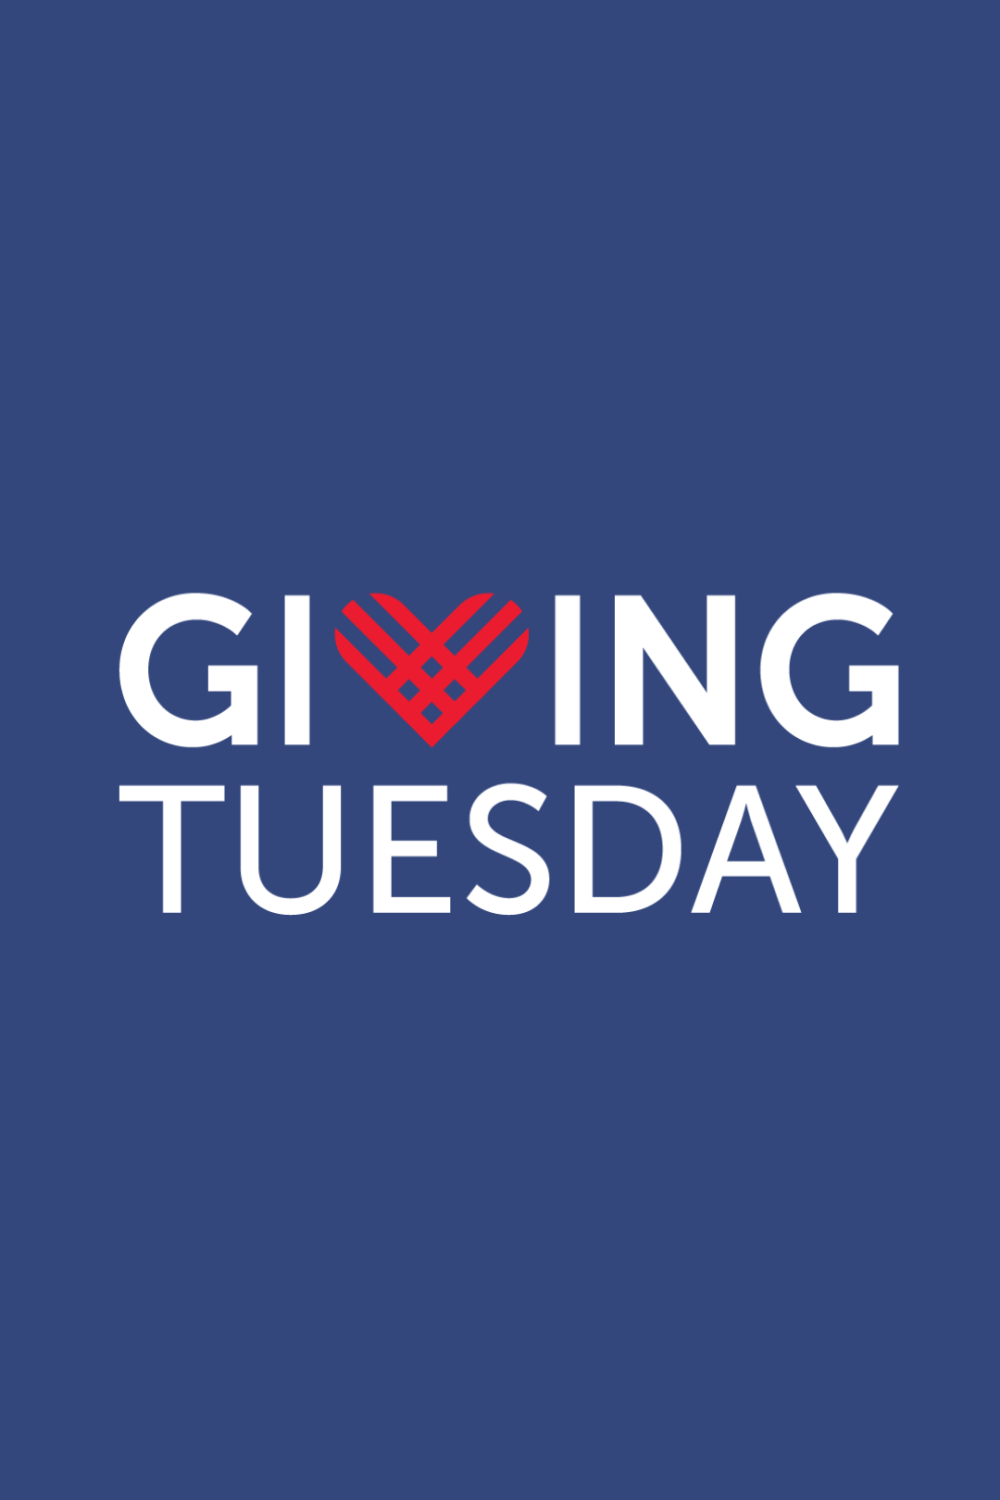 Celebrating #GivingTuesday with My Favorite Organizations